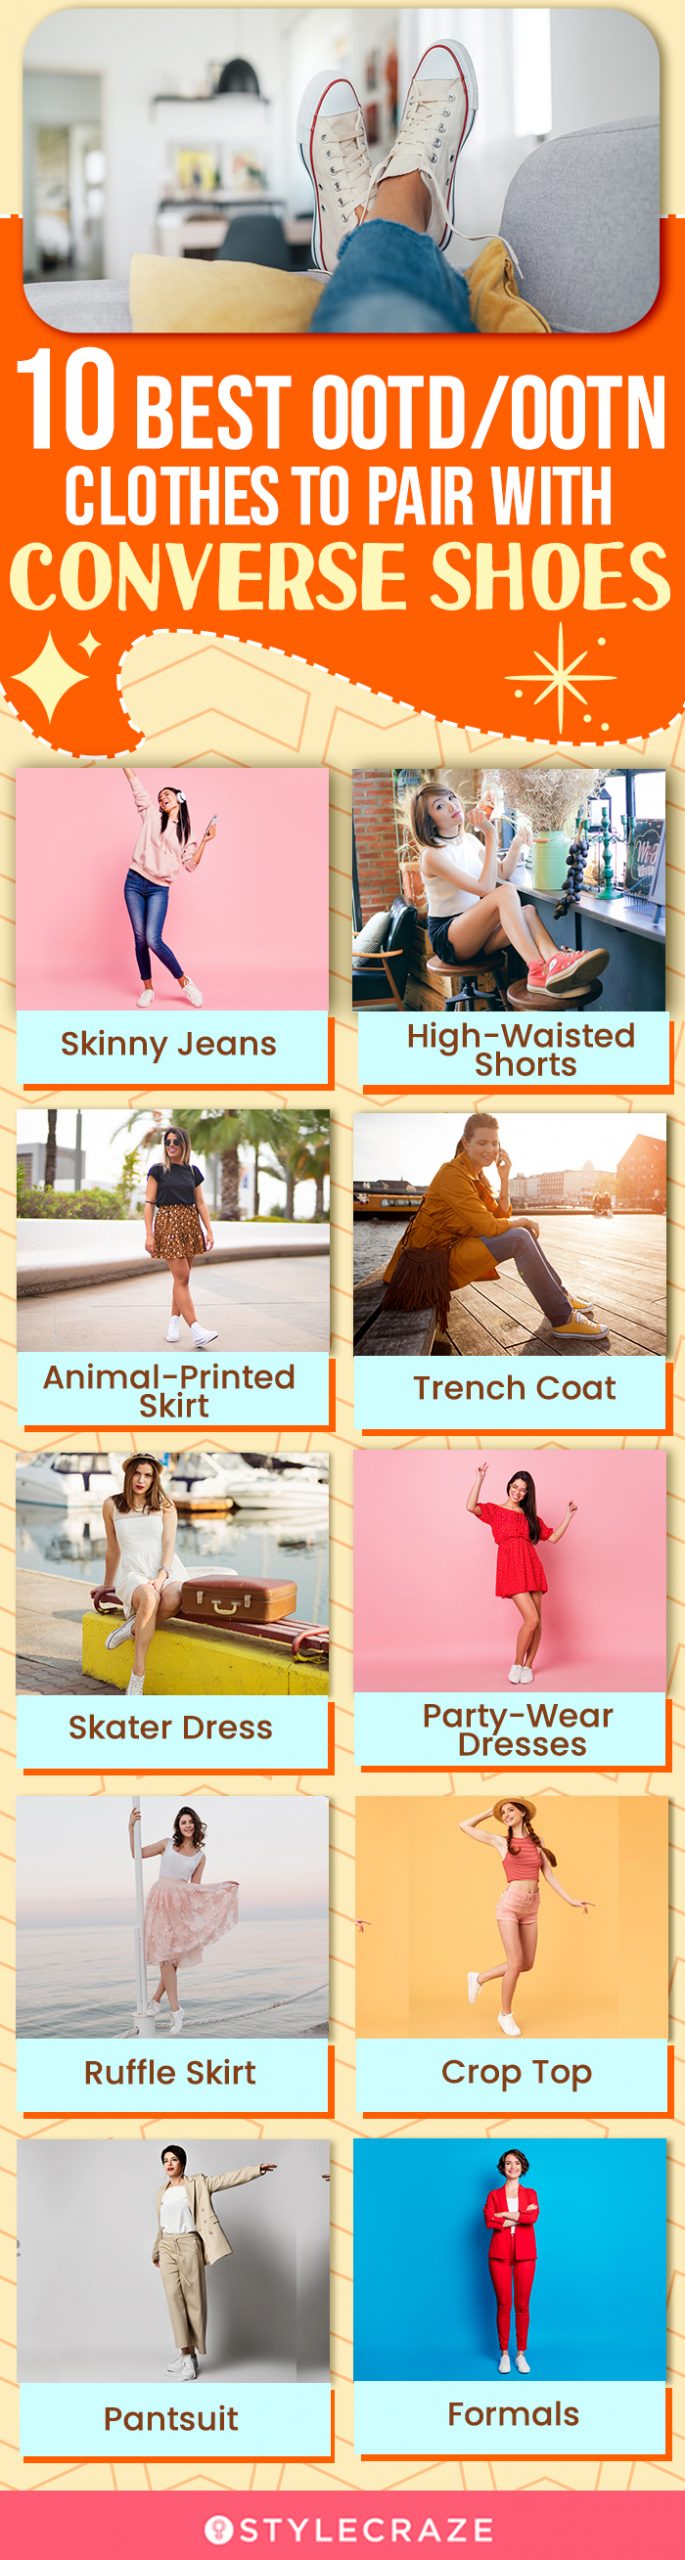 10 best ootd/ootn/clothes to pair with converse shoes (infographic)